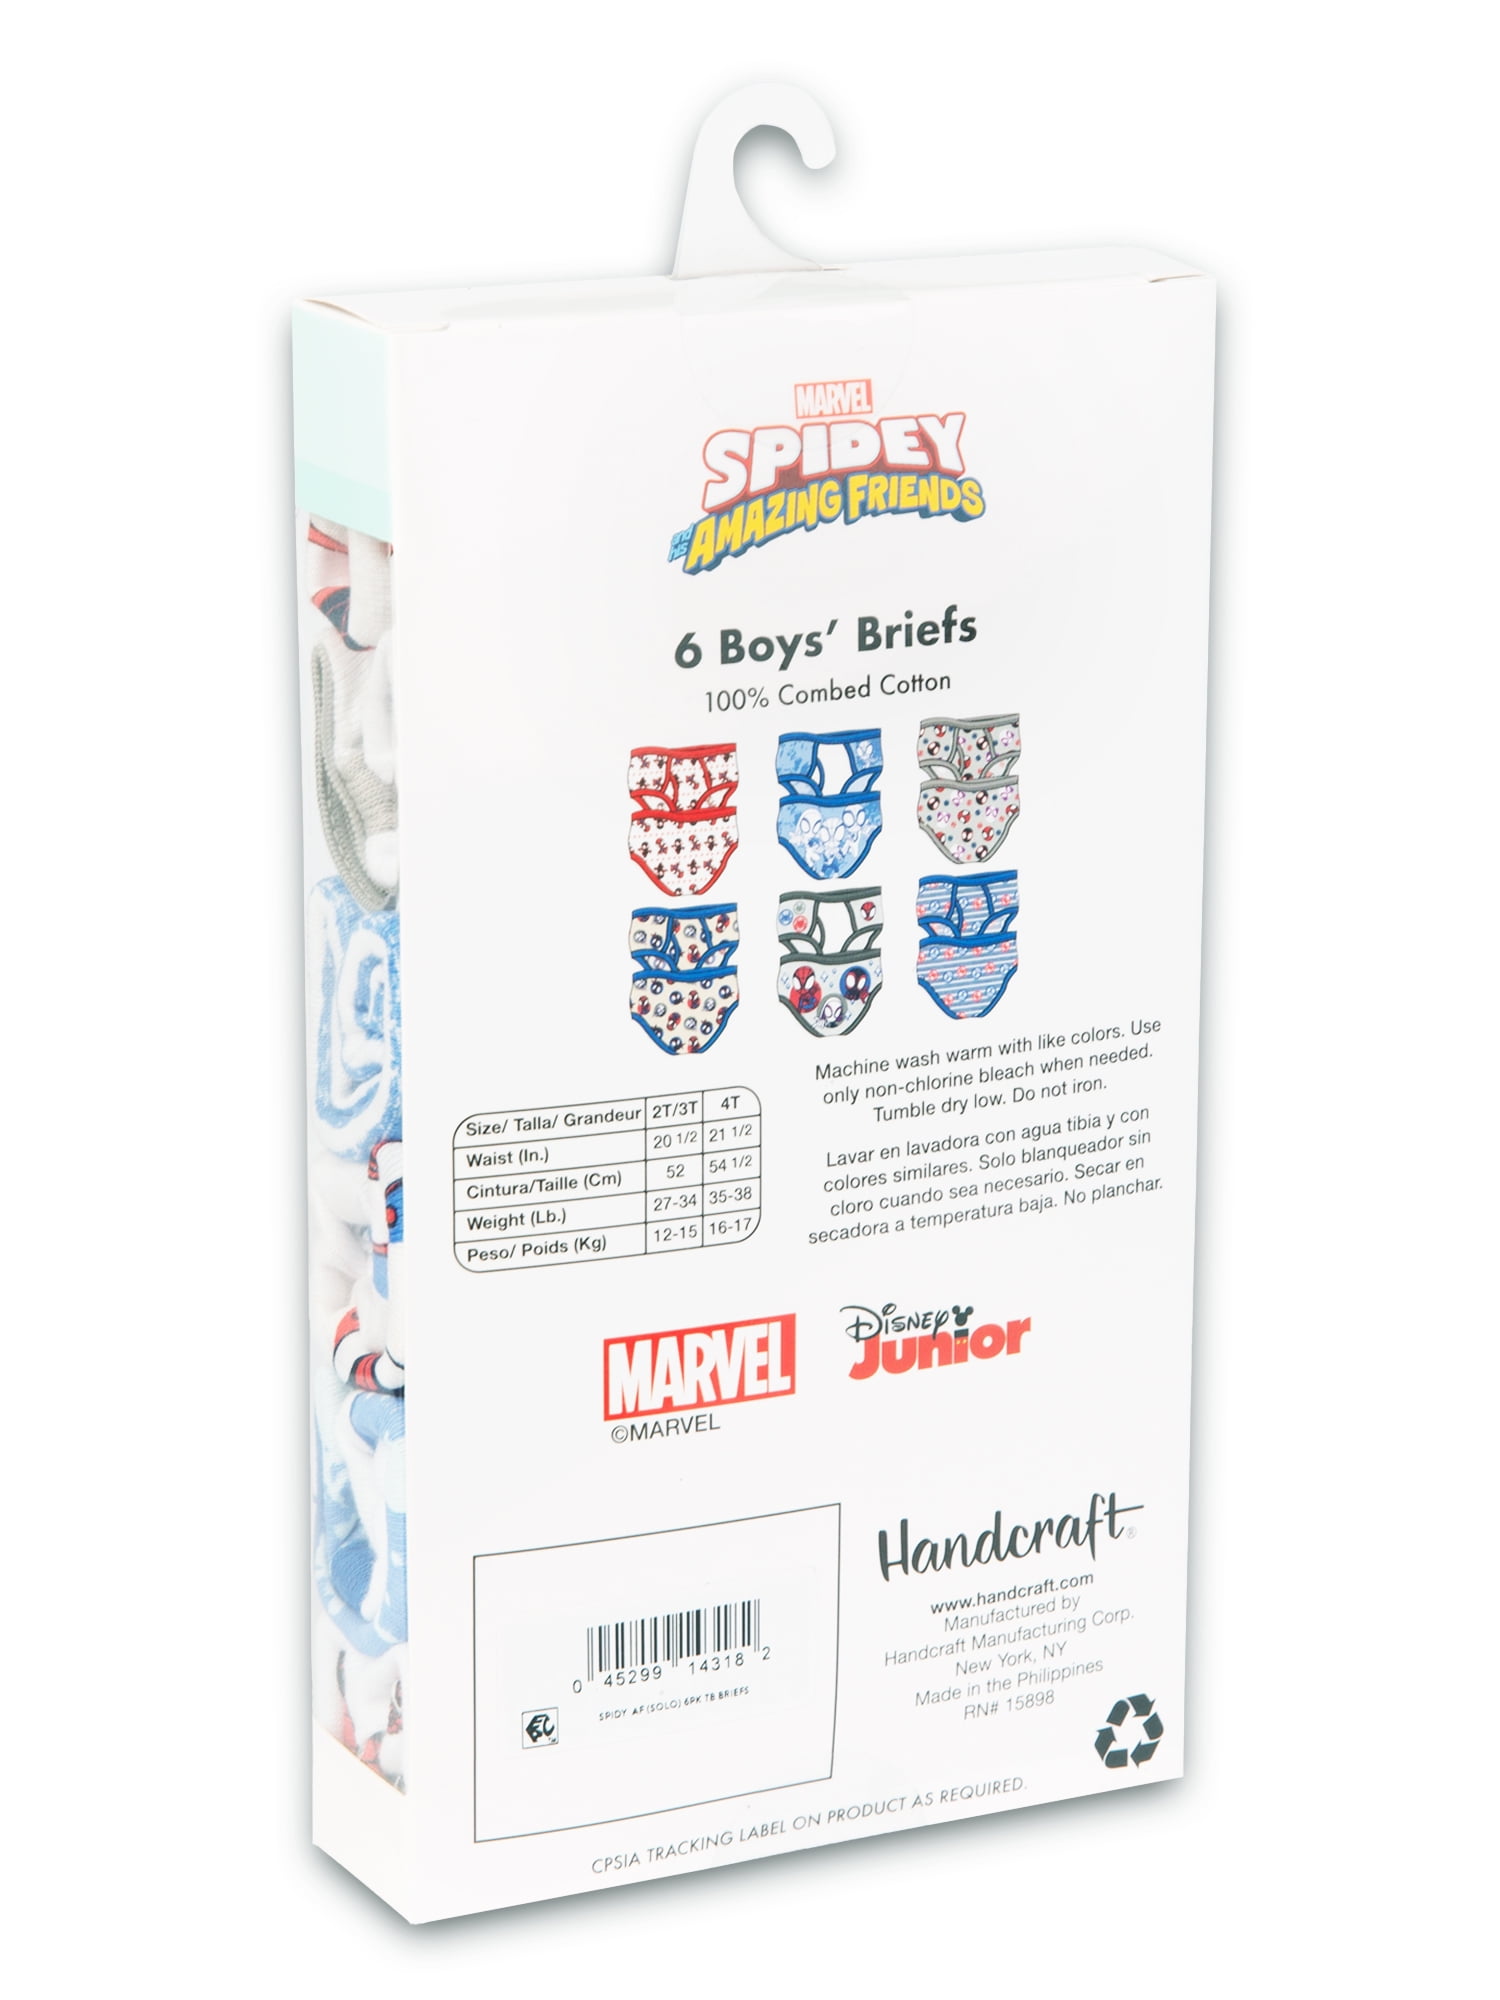 Spidey and His Amazing Friends Toddler Boys Briefs, 6 Pack Sizes 2T-4T 